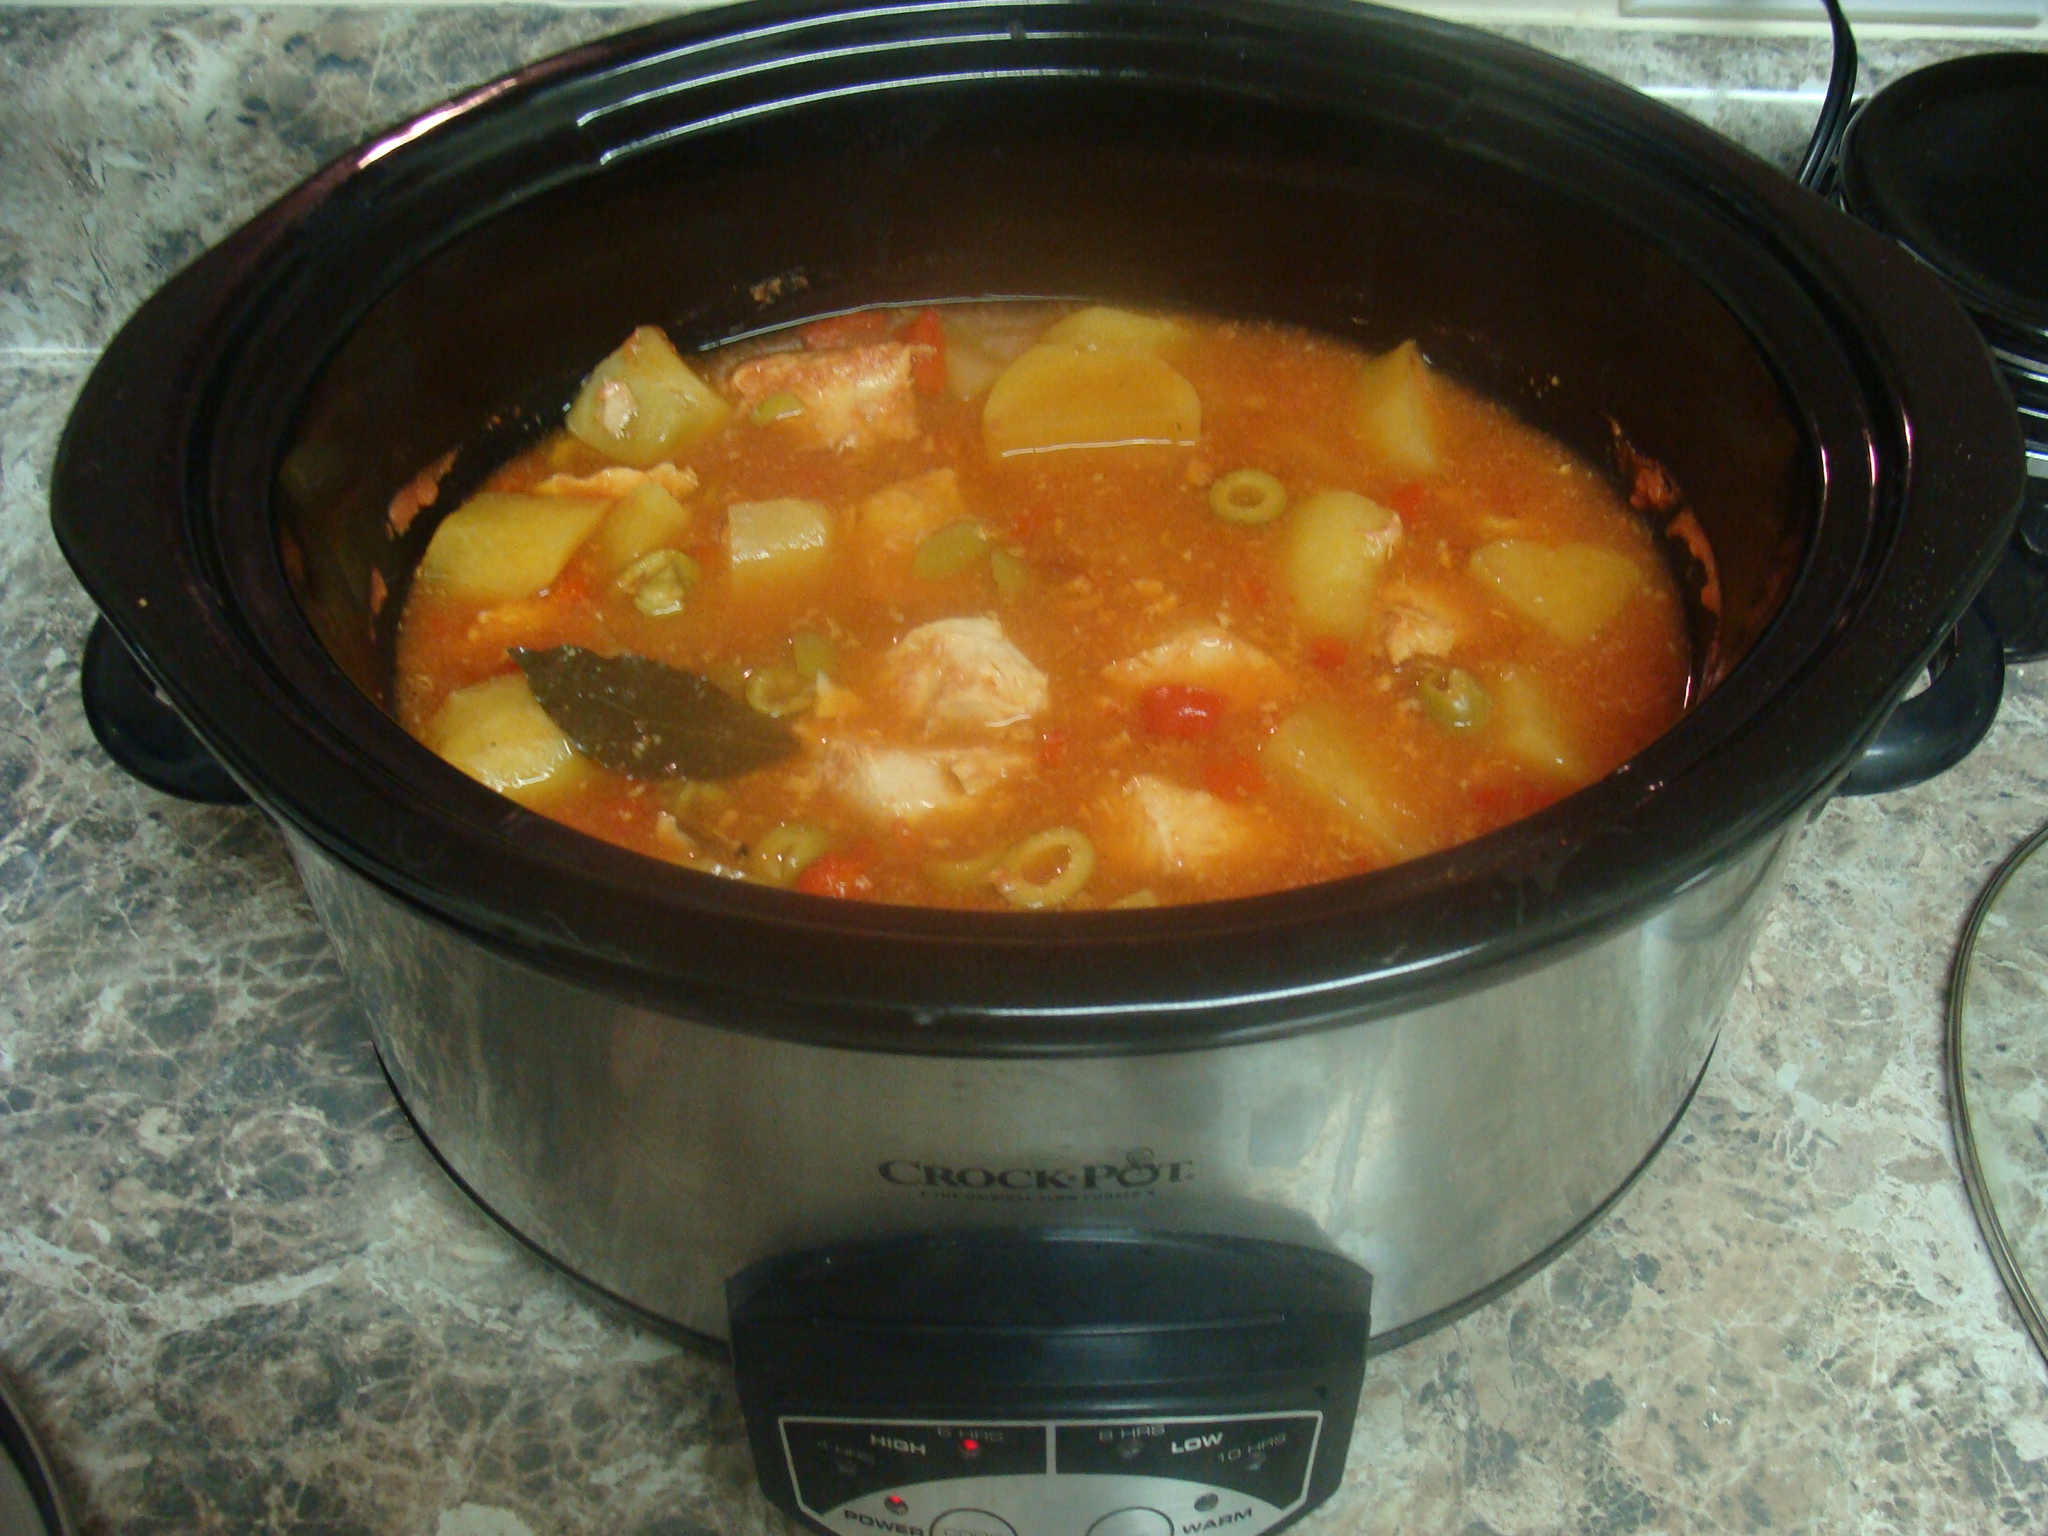 What is a simple recipe for Crock-Pot chicken stew?